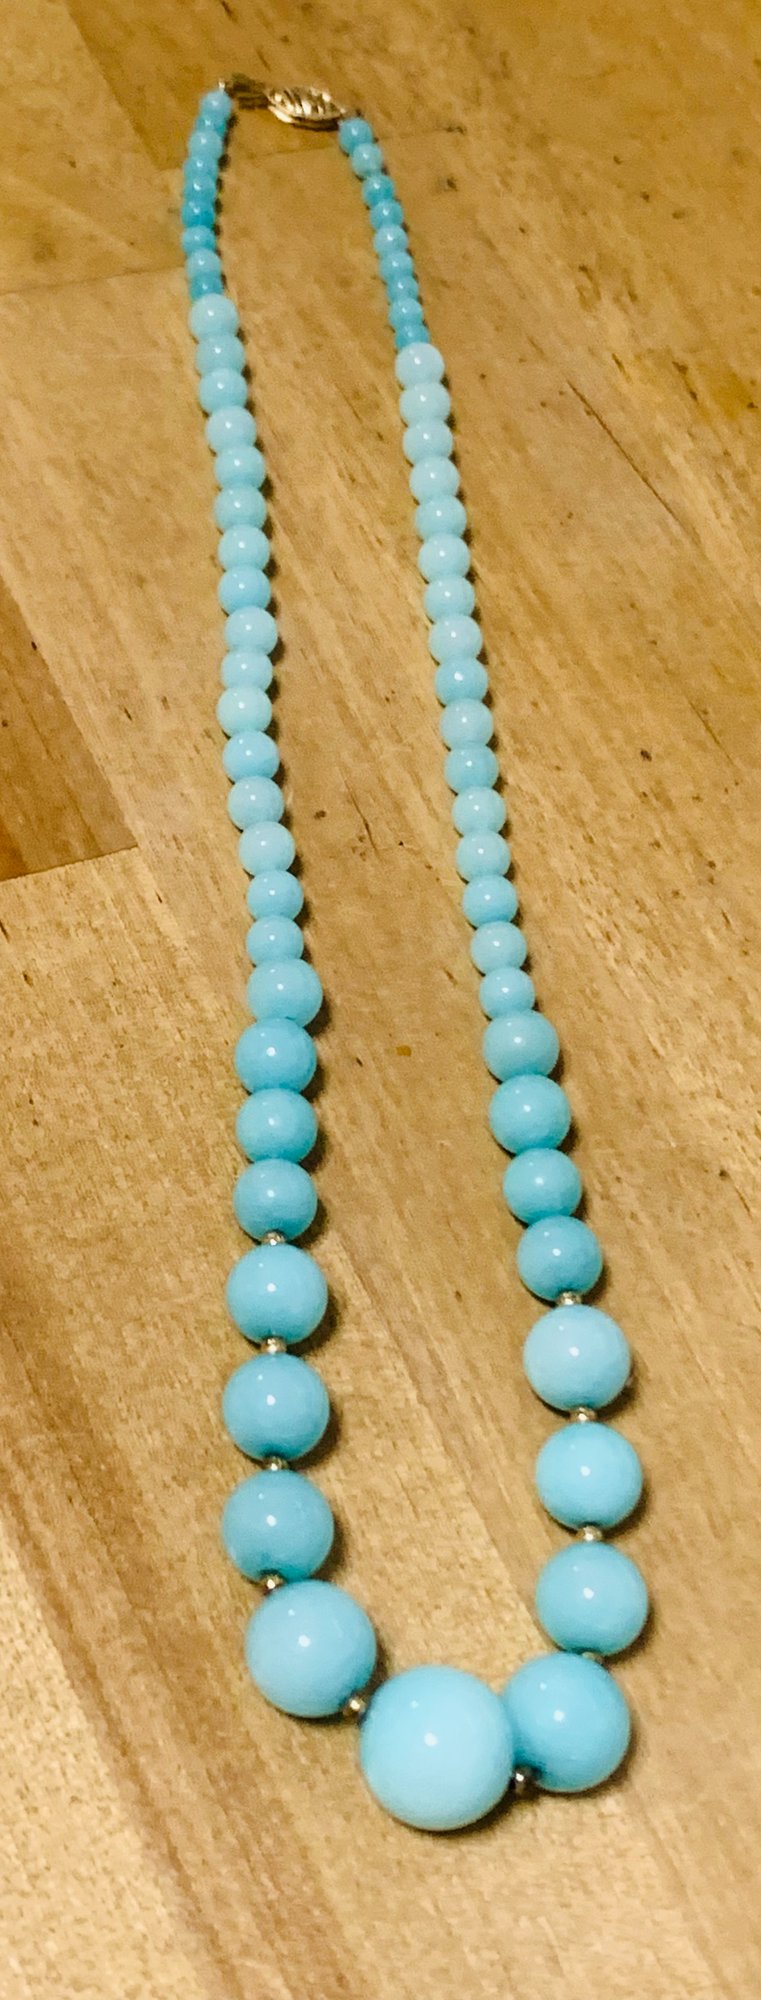 Dyed Chalcedony Beaded Necklace 14K Clasp #1453267 | Auctionninja.com